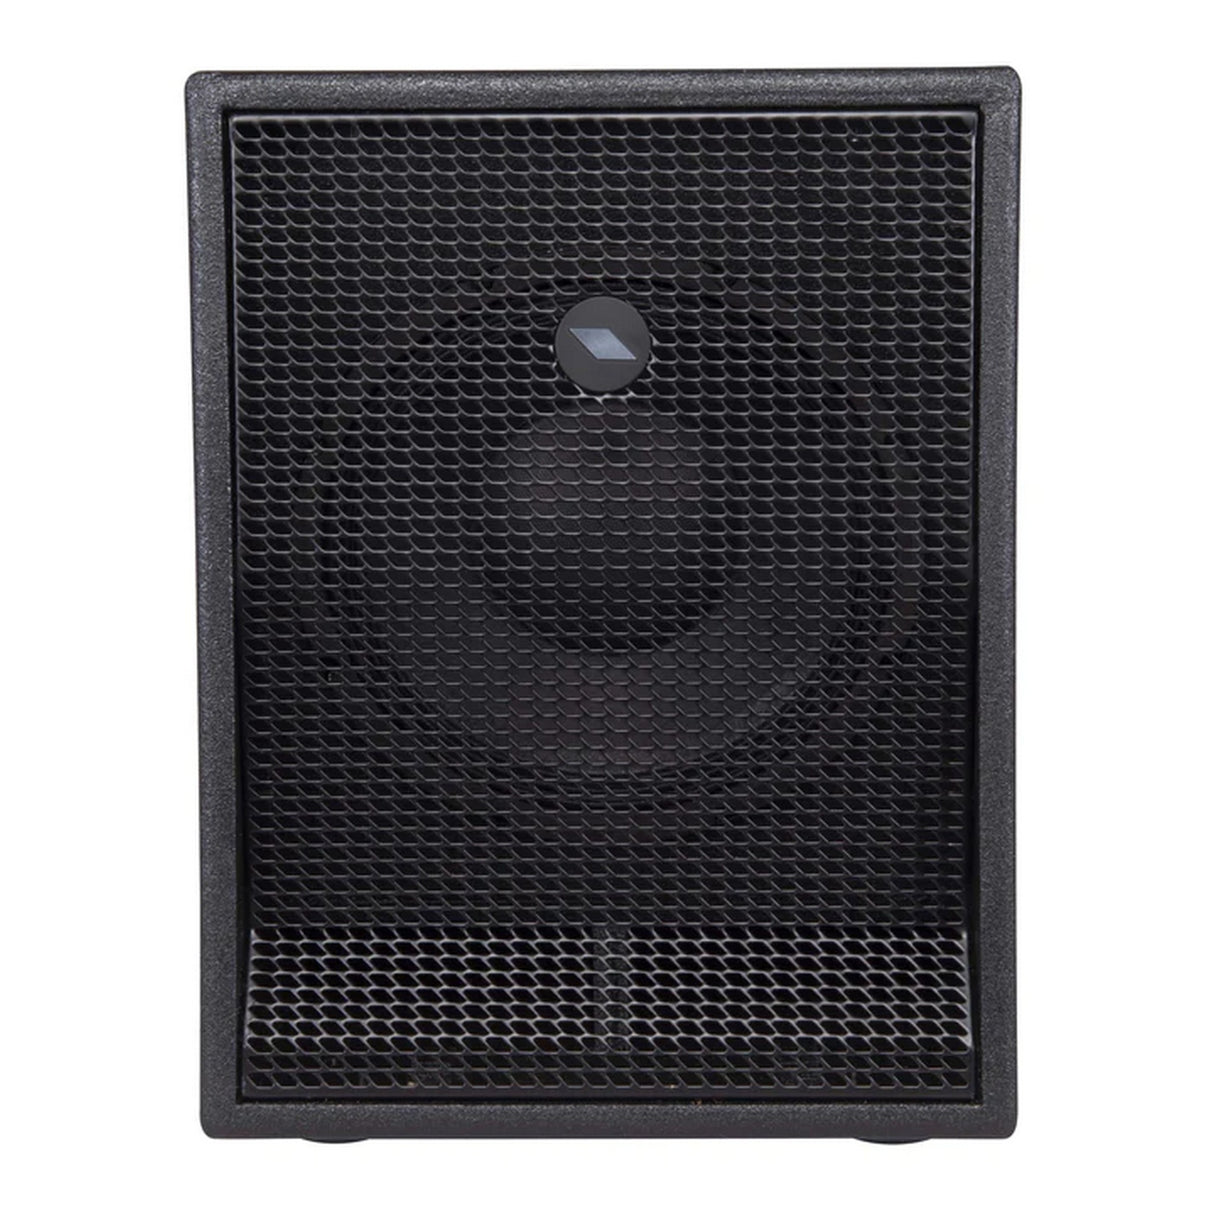 PROEL S10A Active 10-Inch Subwoofer